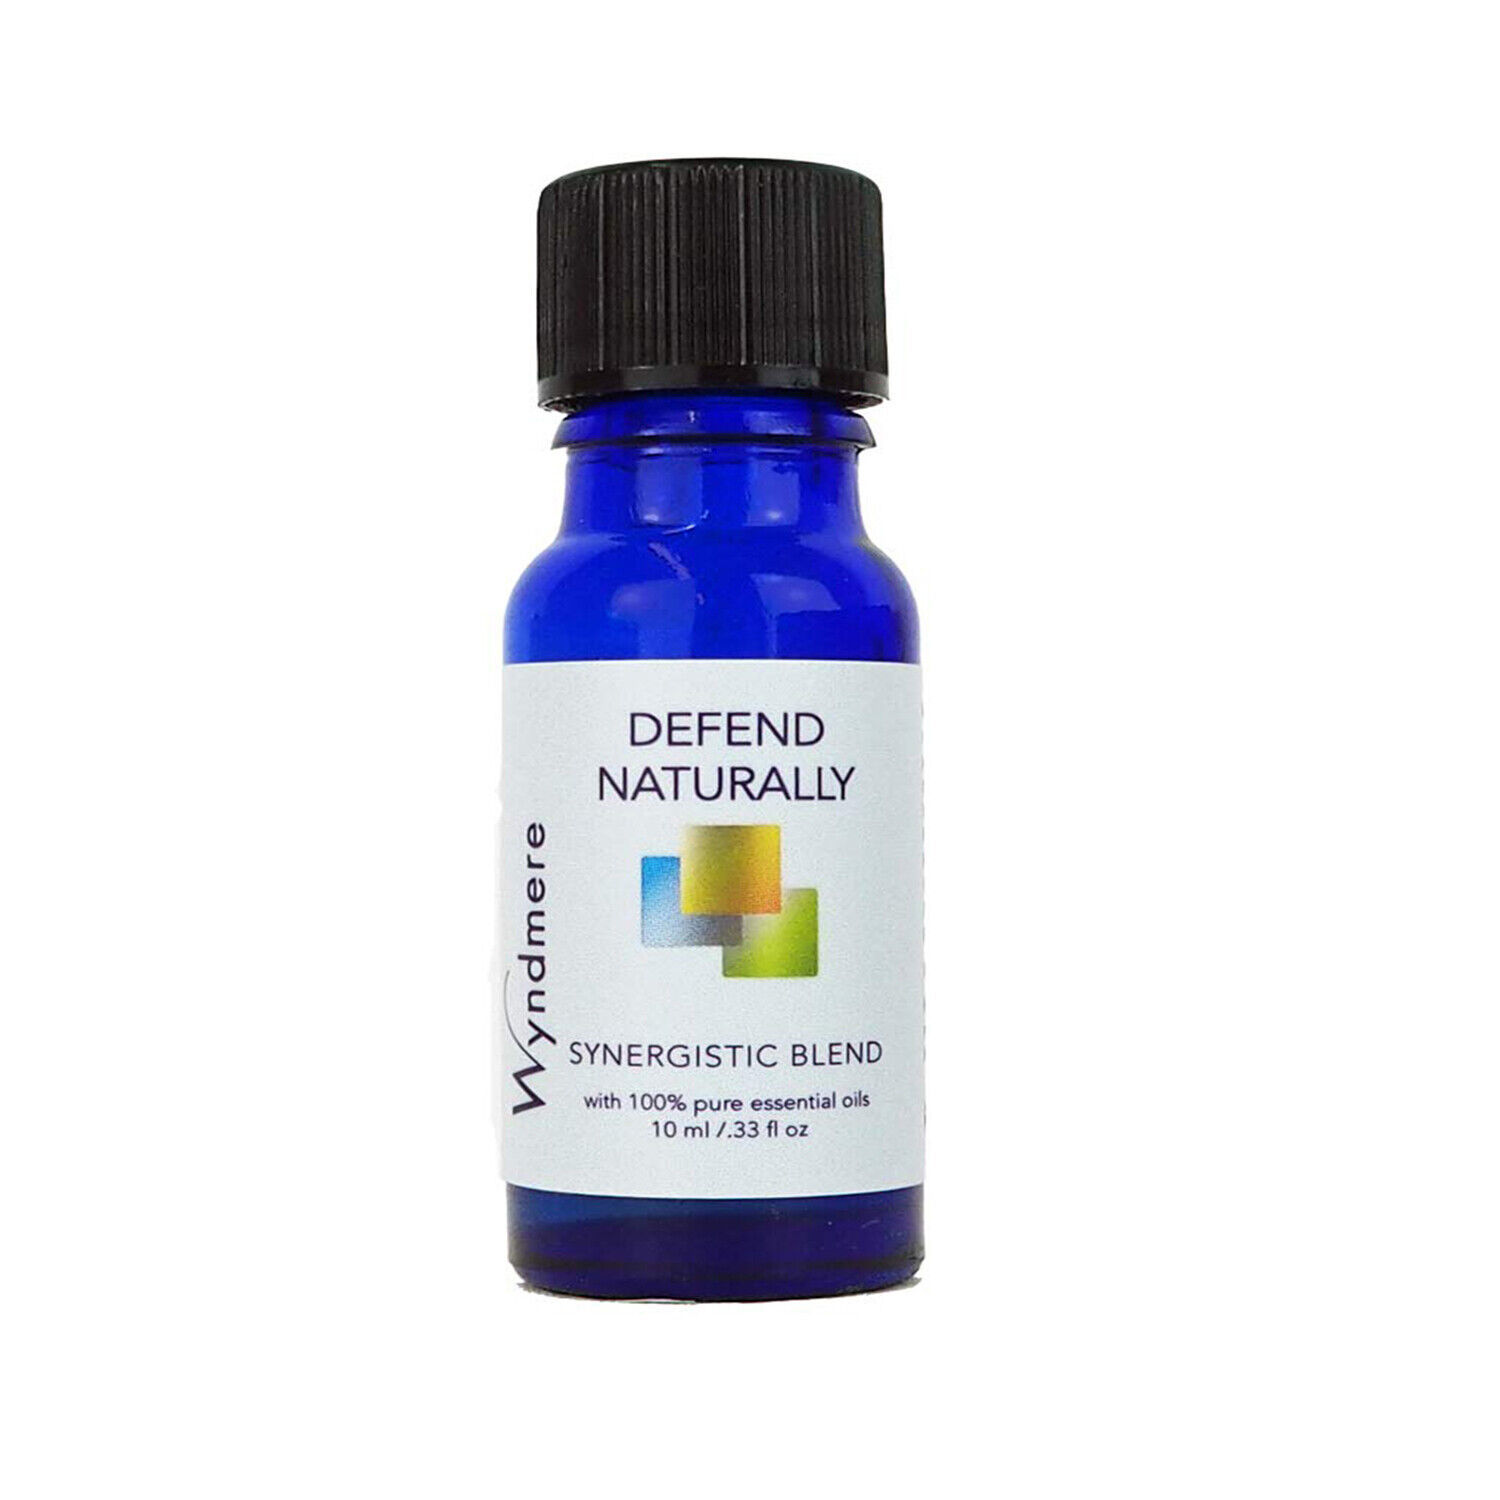 Wyndmere Defend Naturally Synergistic Blend, 0.33 Fluid Ounce - $15.19